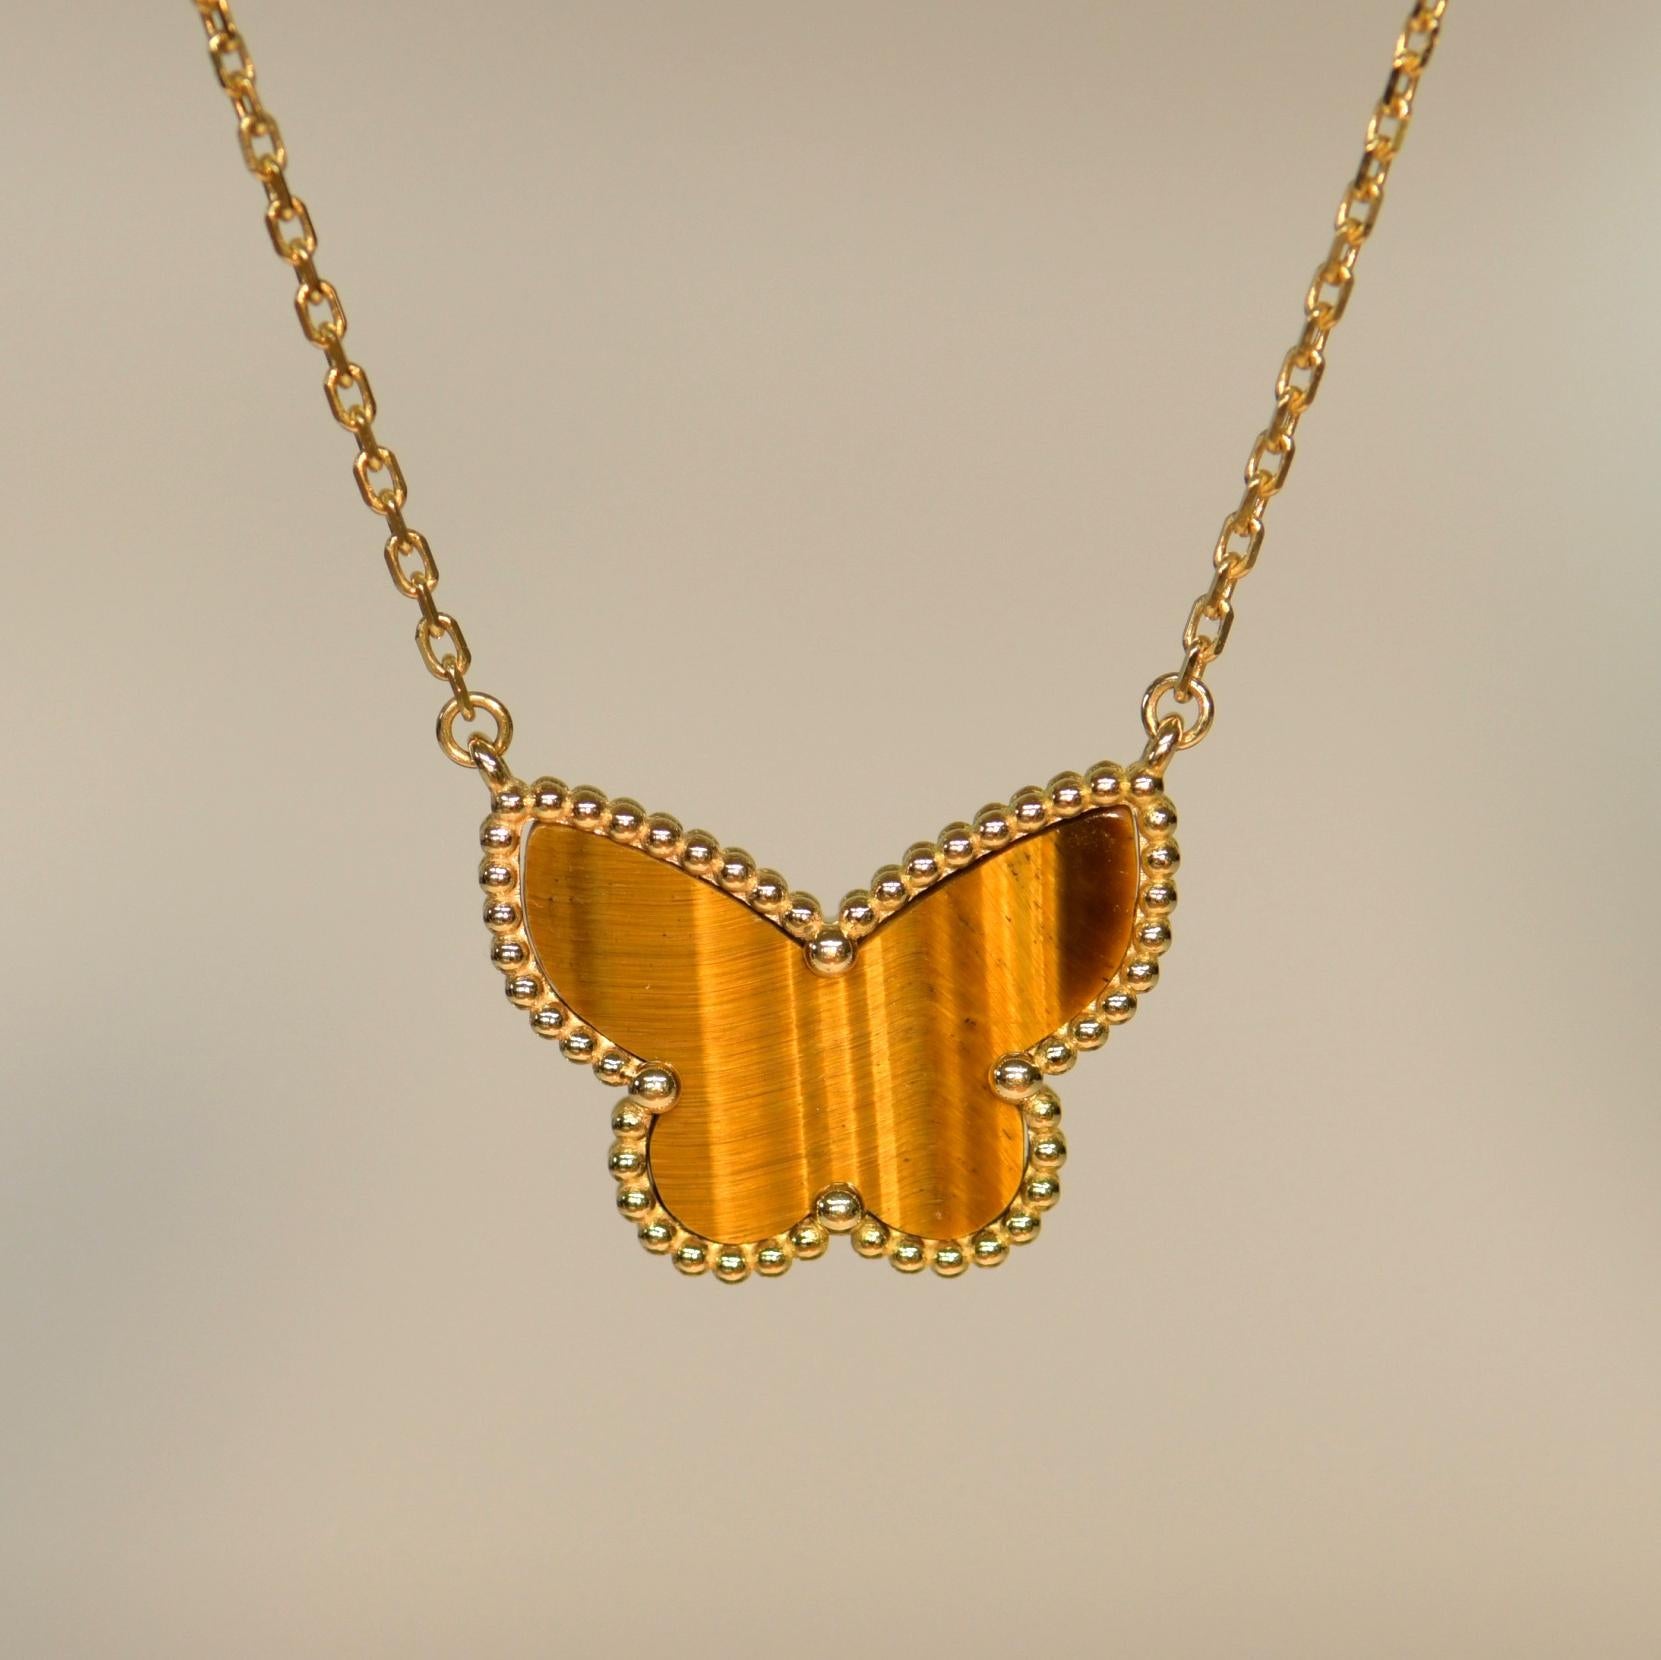 A classic Van Cleef & Arpels Tiger Eye pendant necklace.

This is the kind of piece that will become a staple of your jewellery collection. You will find yourself reaching for it time after time. It will go with almost any outfit and add a splash of